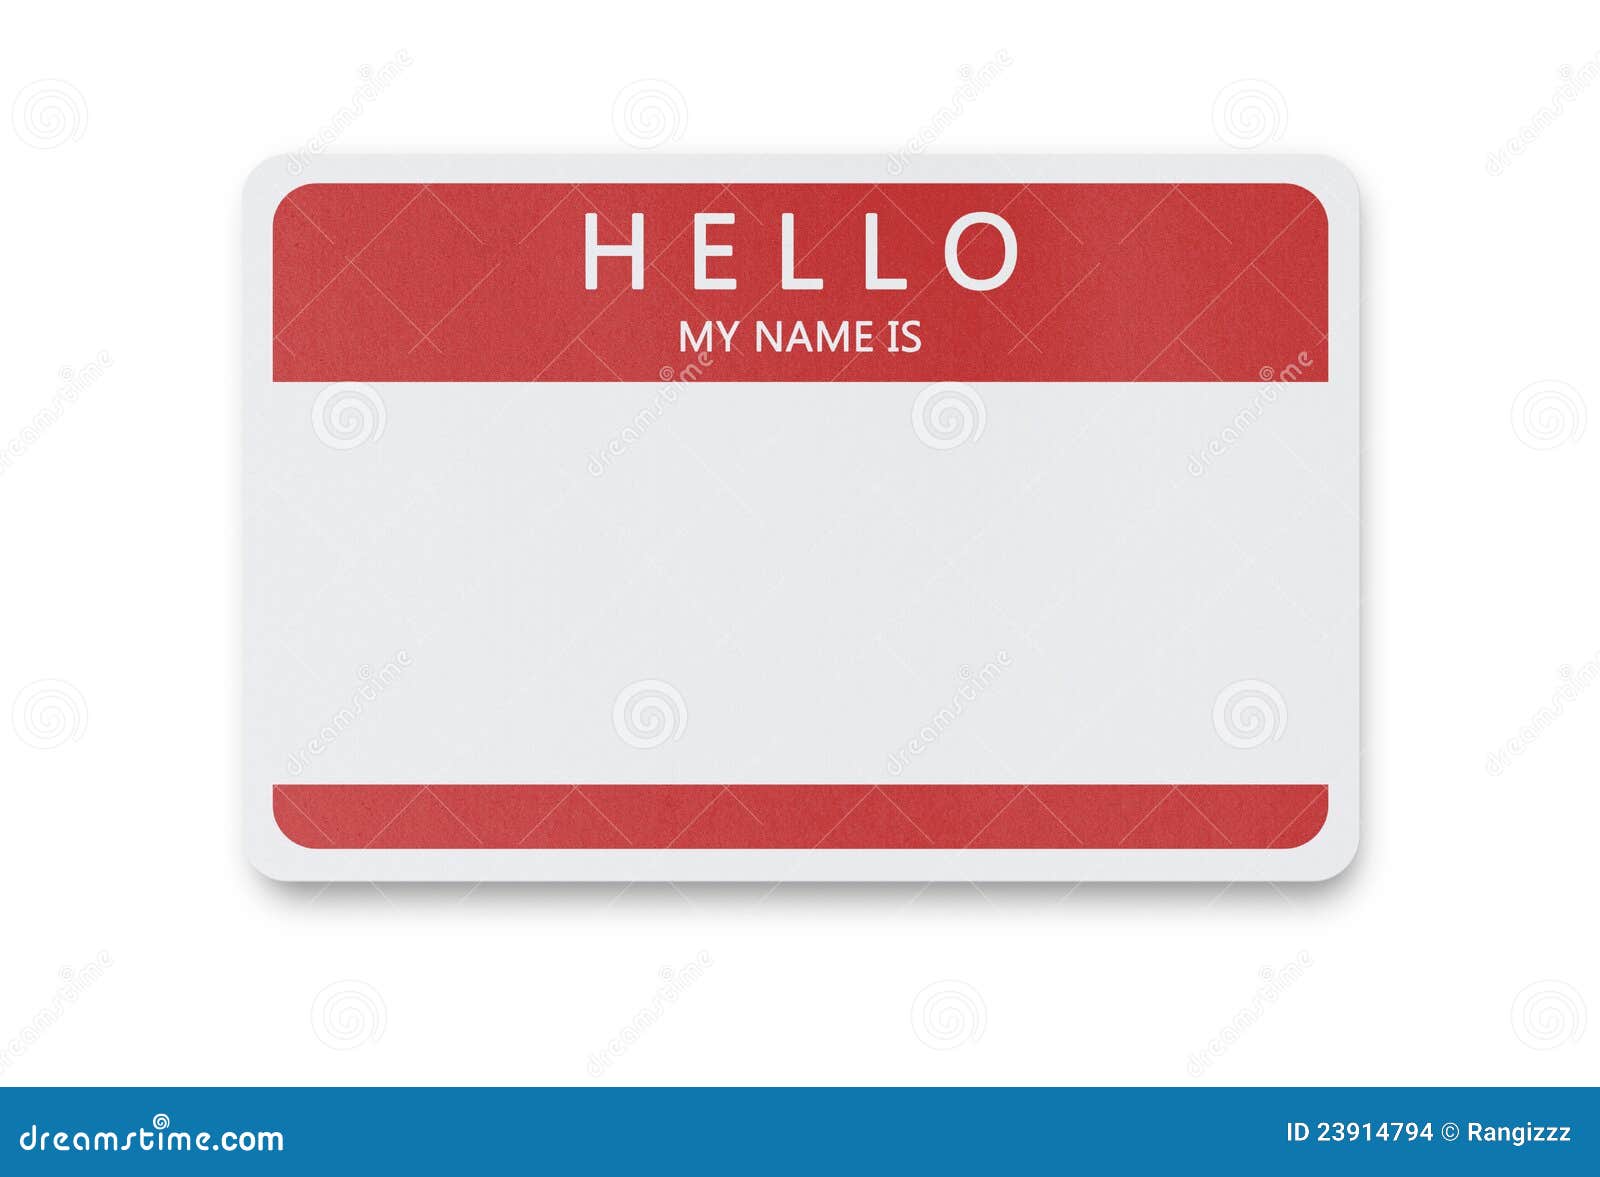 Blank name tag isolated on white background with clipping path.